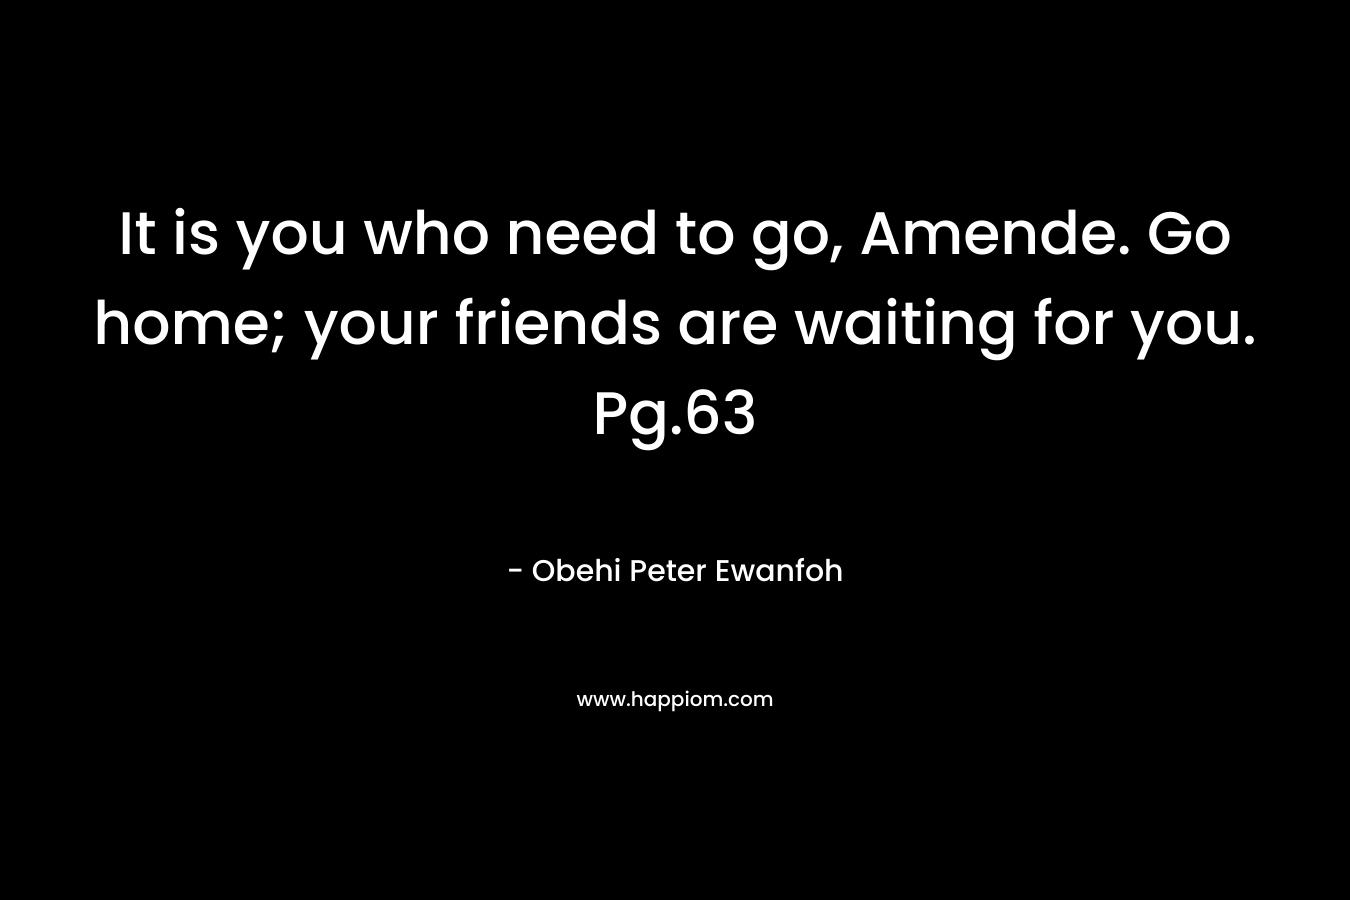 It is you who need to go, Amende. Go home; your friends are waiting for you. Pg.63 – Obehi Peter Ewanfoh